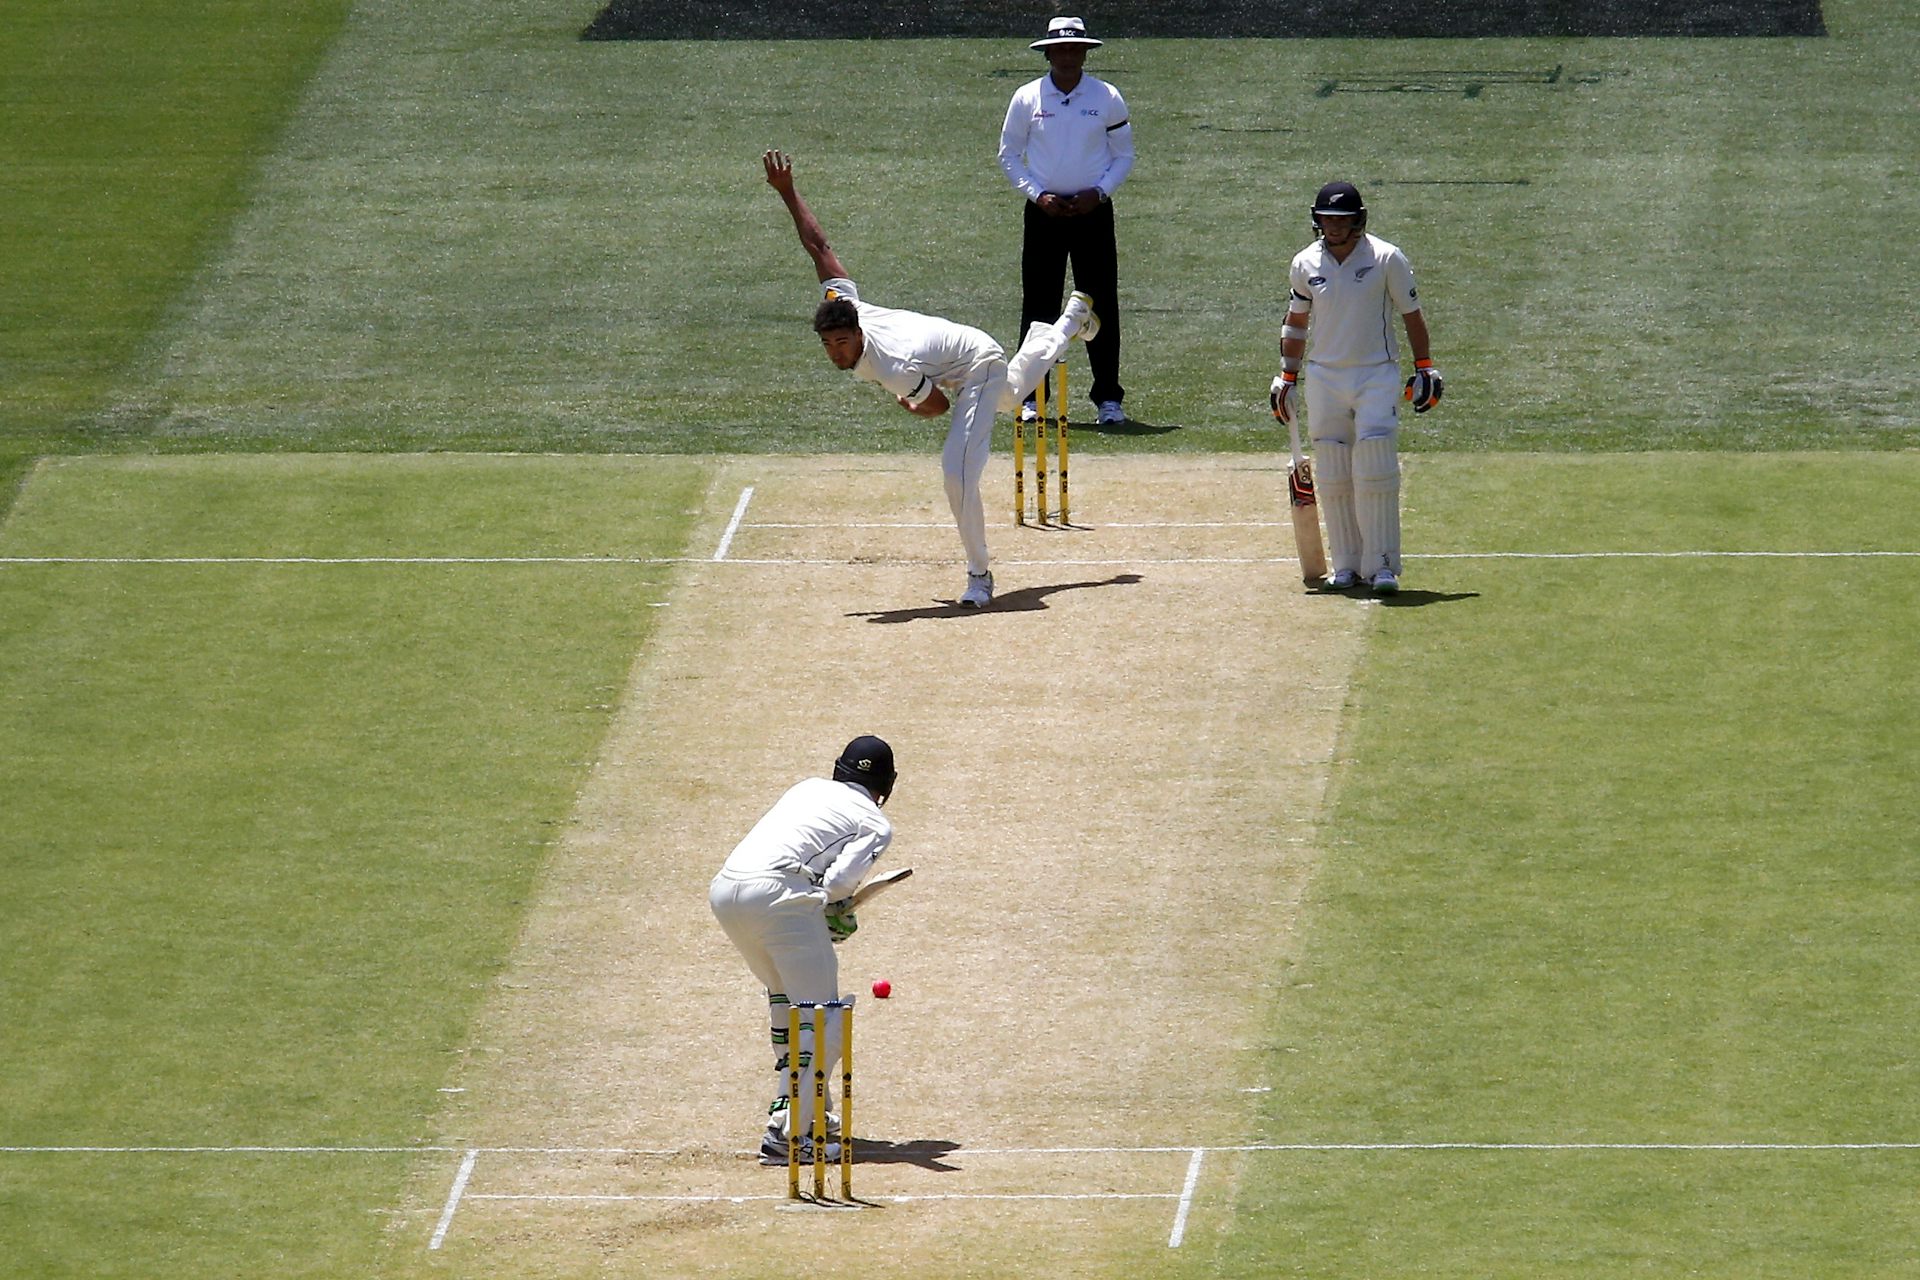 An Australian bowler bowls the ball to a New Zealand batter, while his partner looks on from the other end. All are wearing white uniforms.